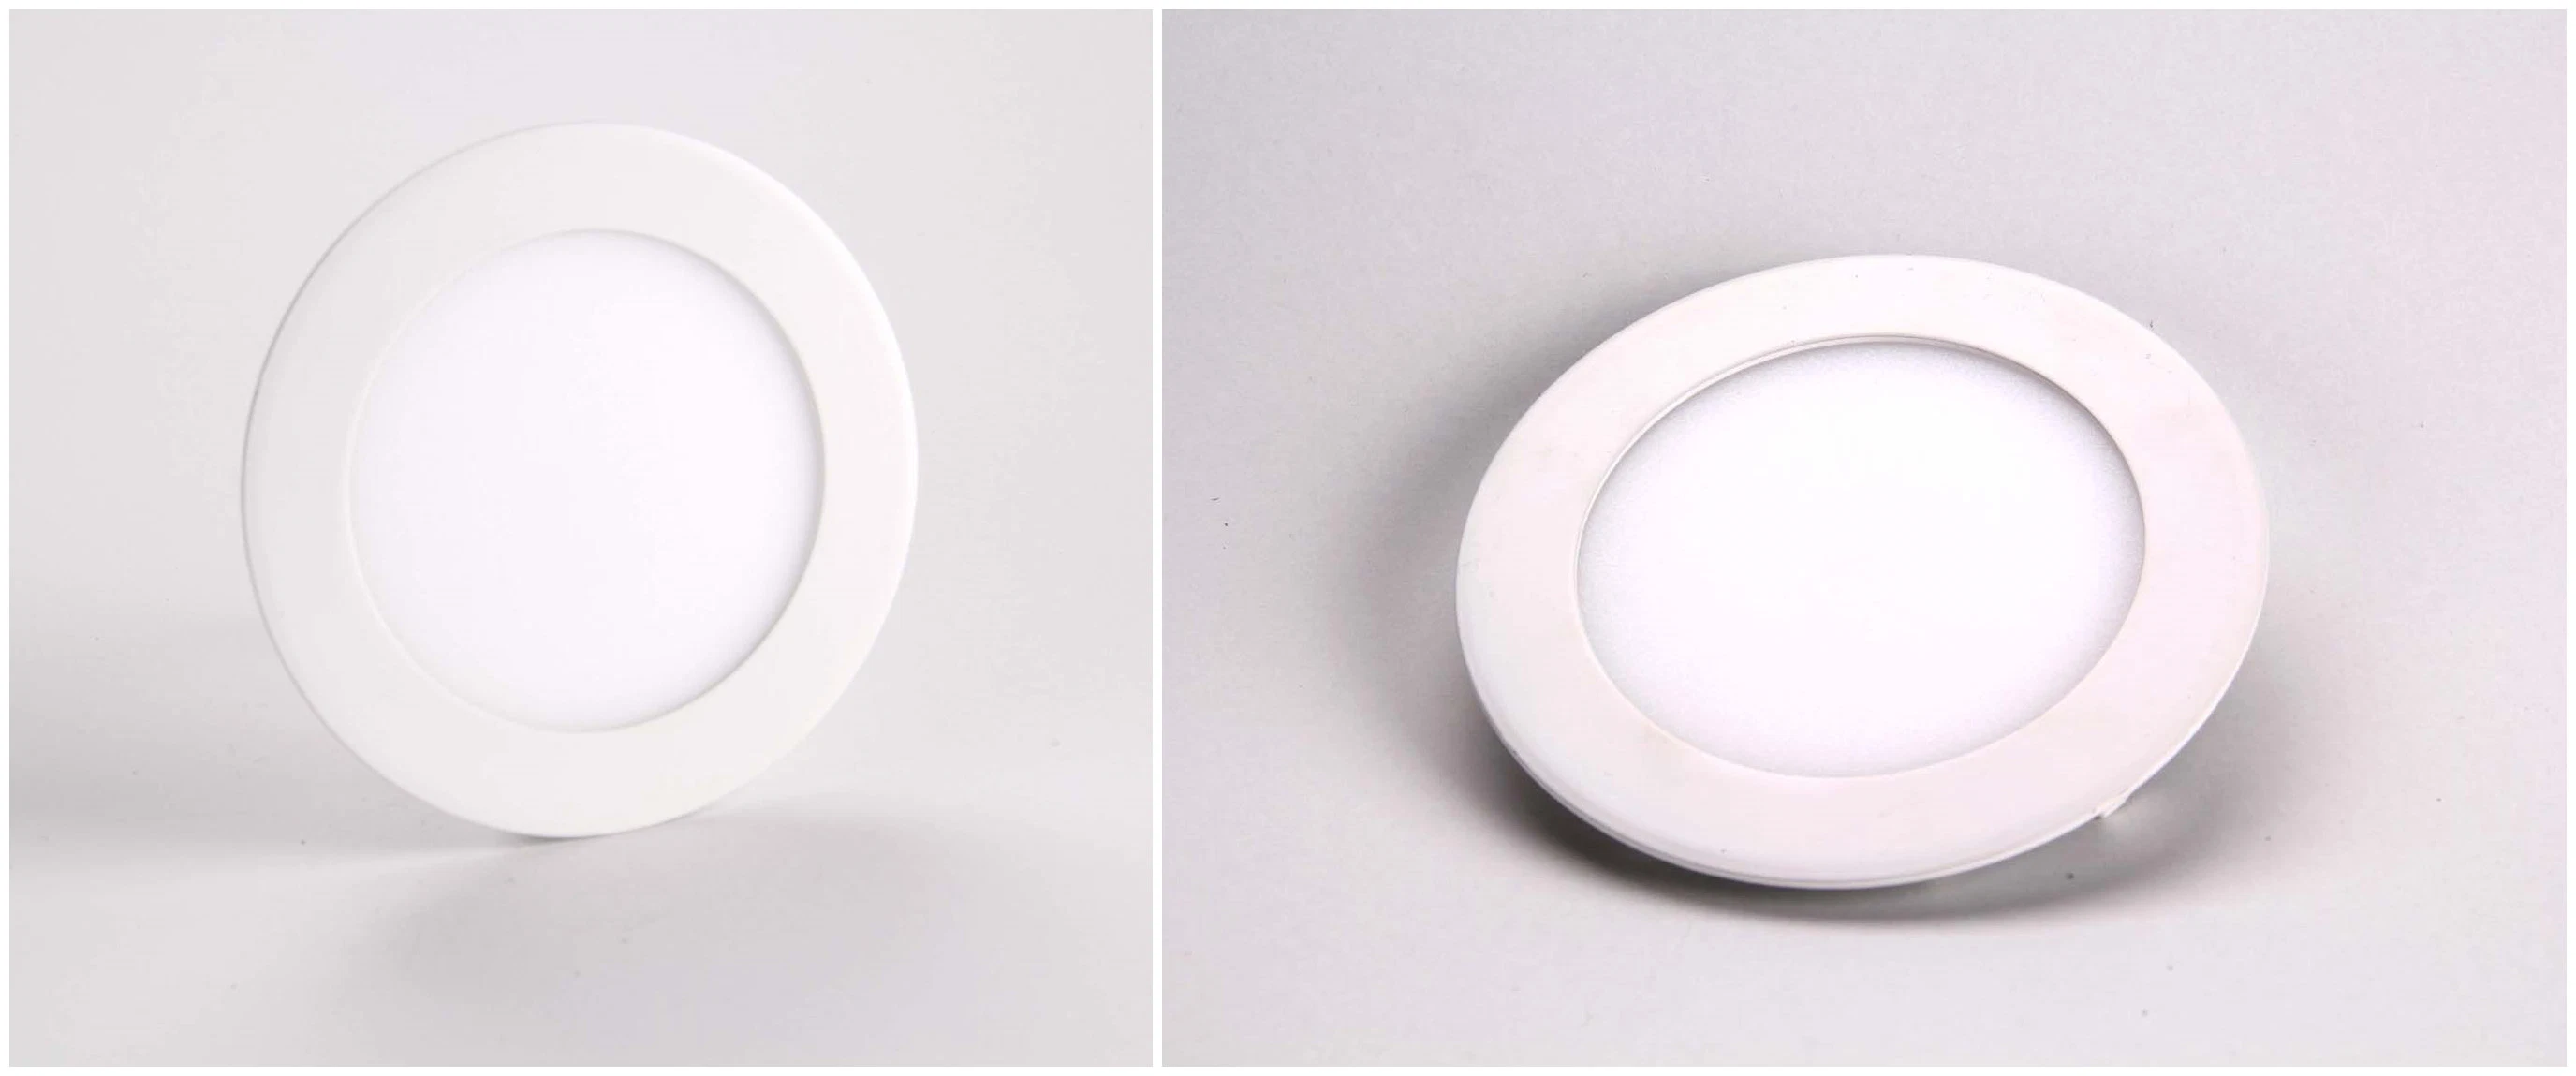 Factory SKD Wholesale/Supplier SKD Parts Aluminium Recessed Panel 6W, 9W, 12W, 15W, 18W, 24W LED Bulb Lights